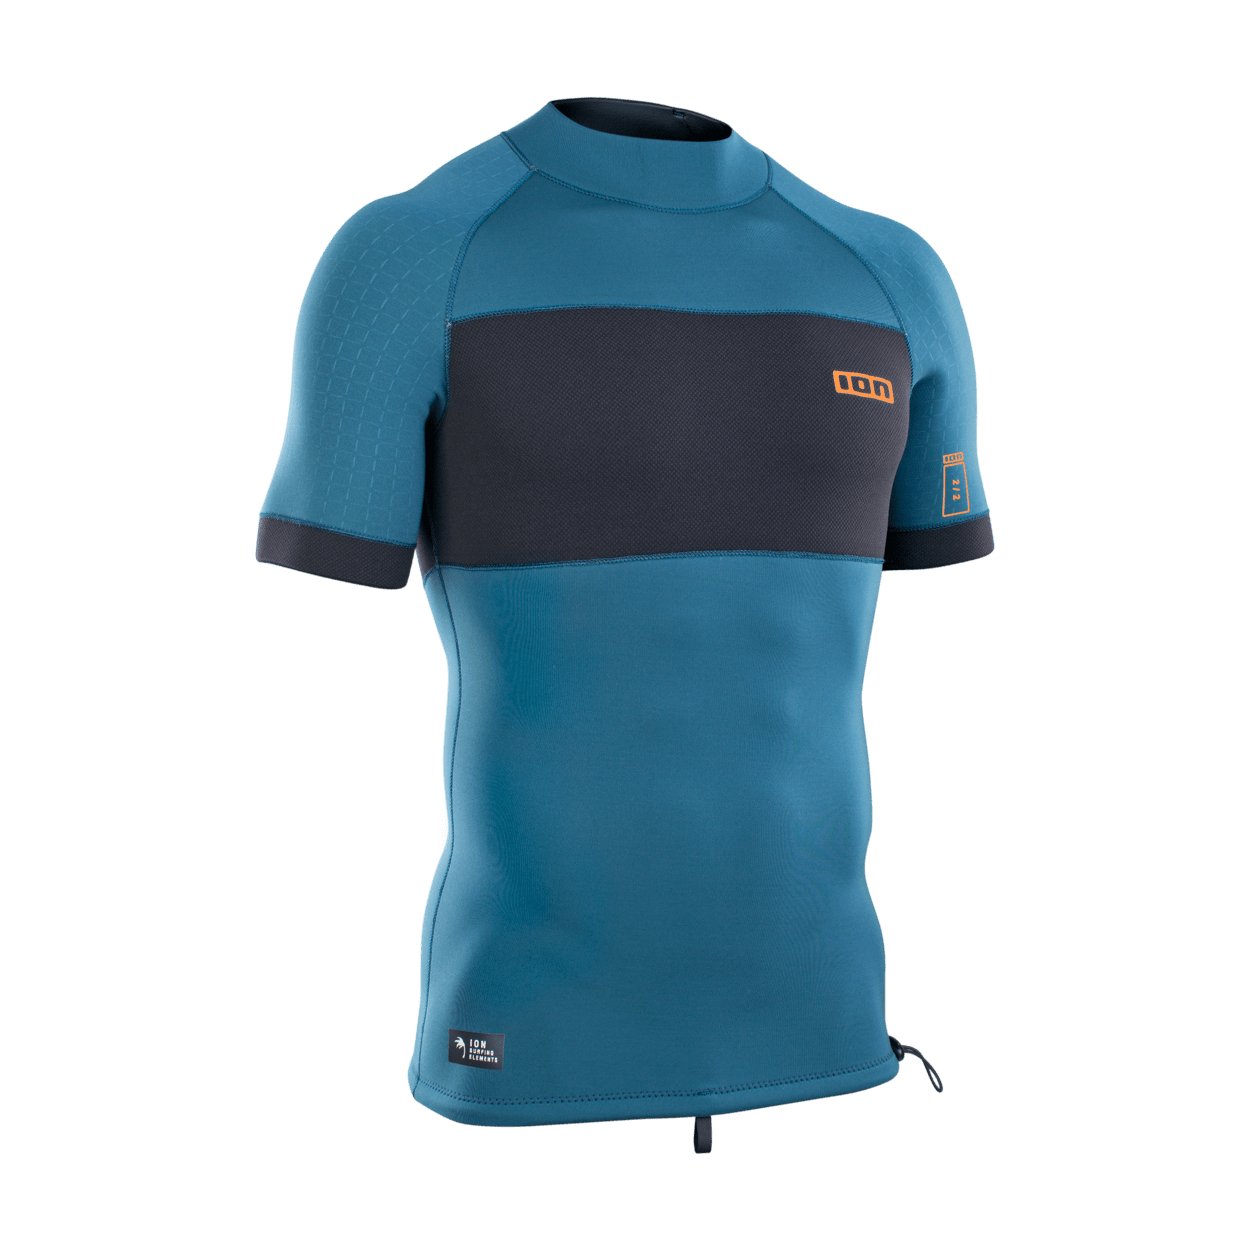 ION Neo Top 2/2 SS men 2022 - Worthing Watersports - 9010583058726 - Tops - ION Water